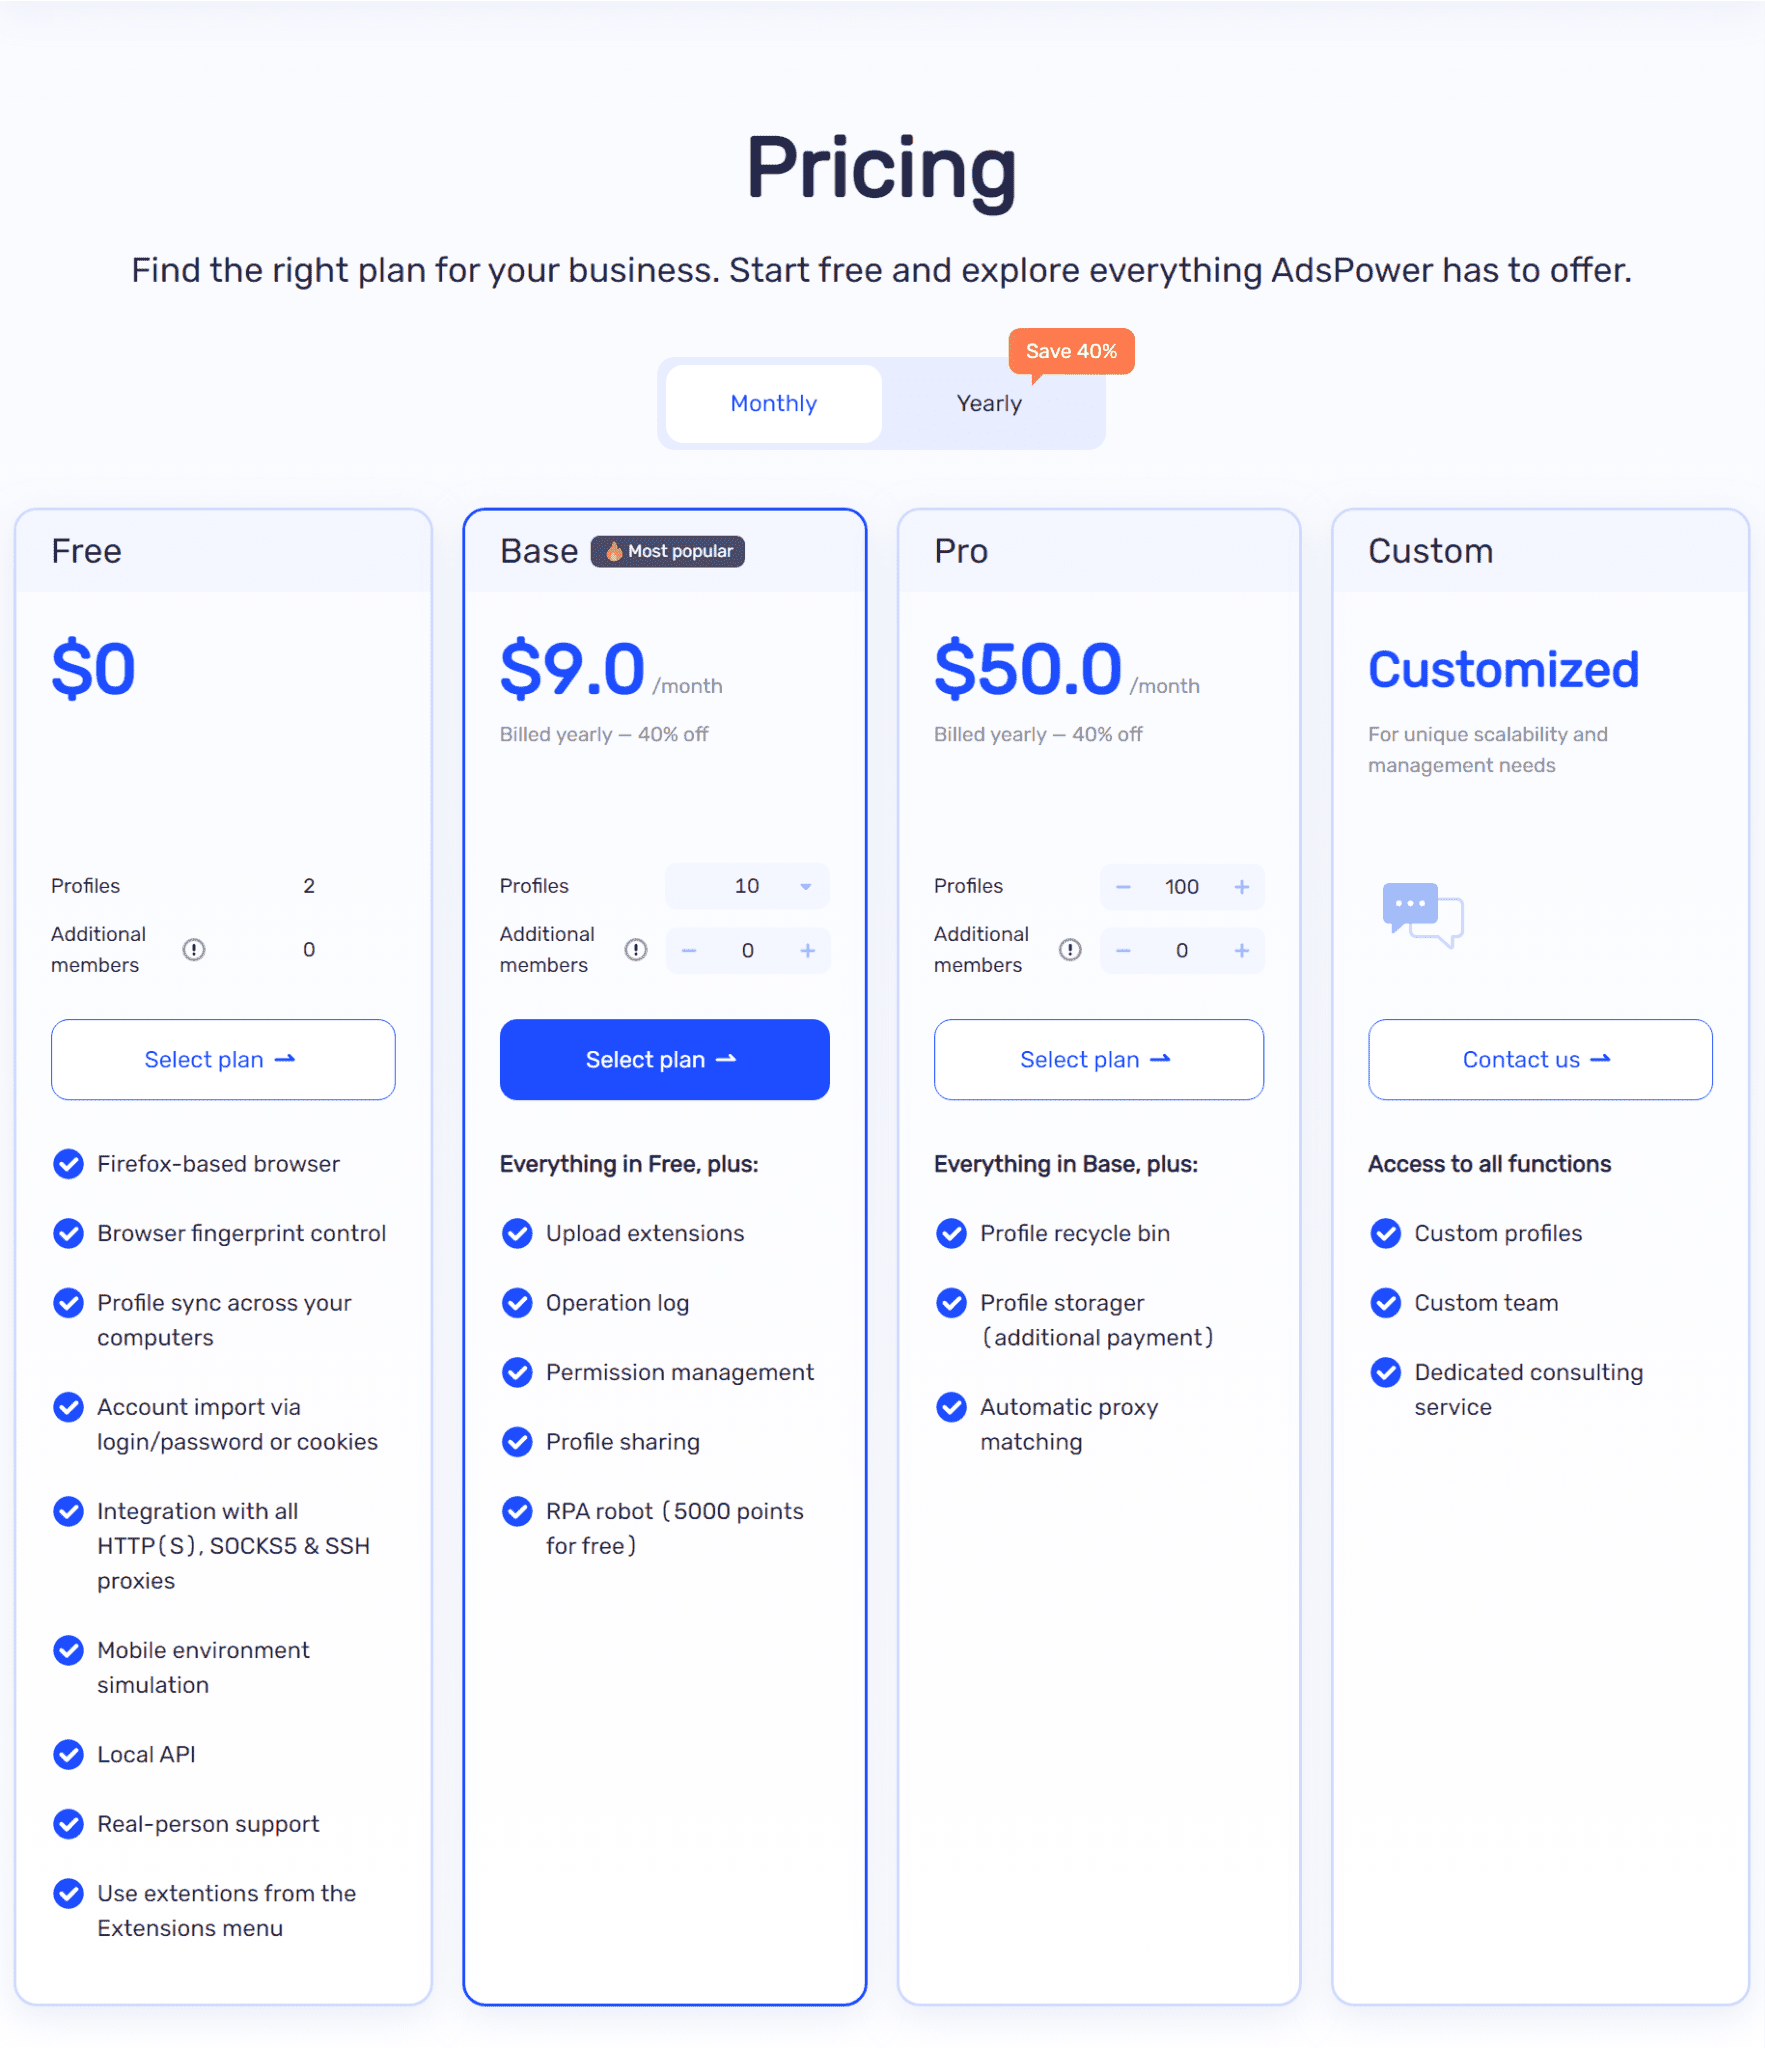 Pricing of AdsPower